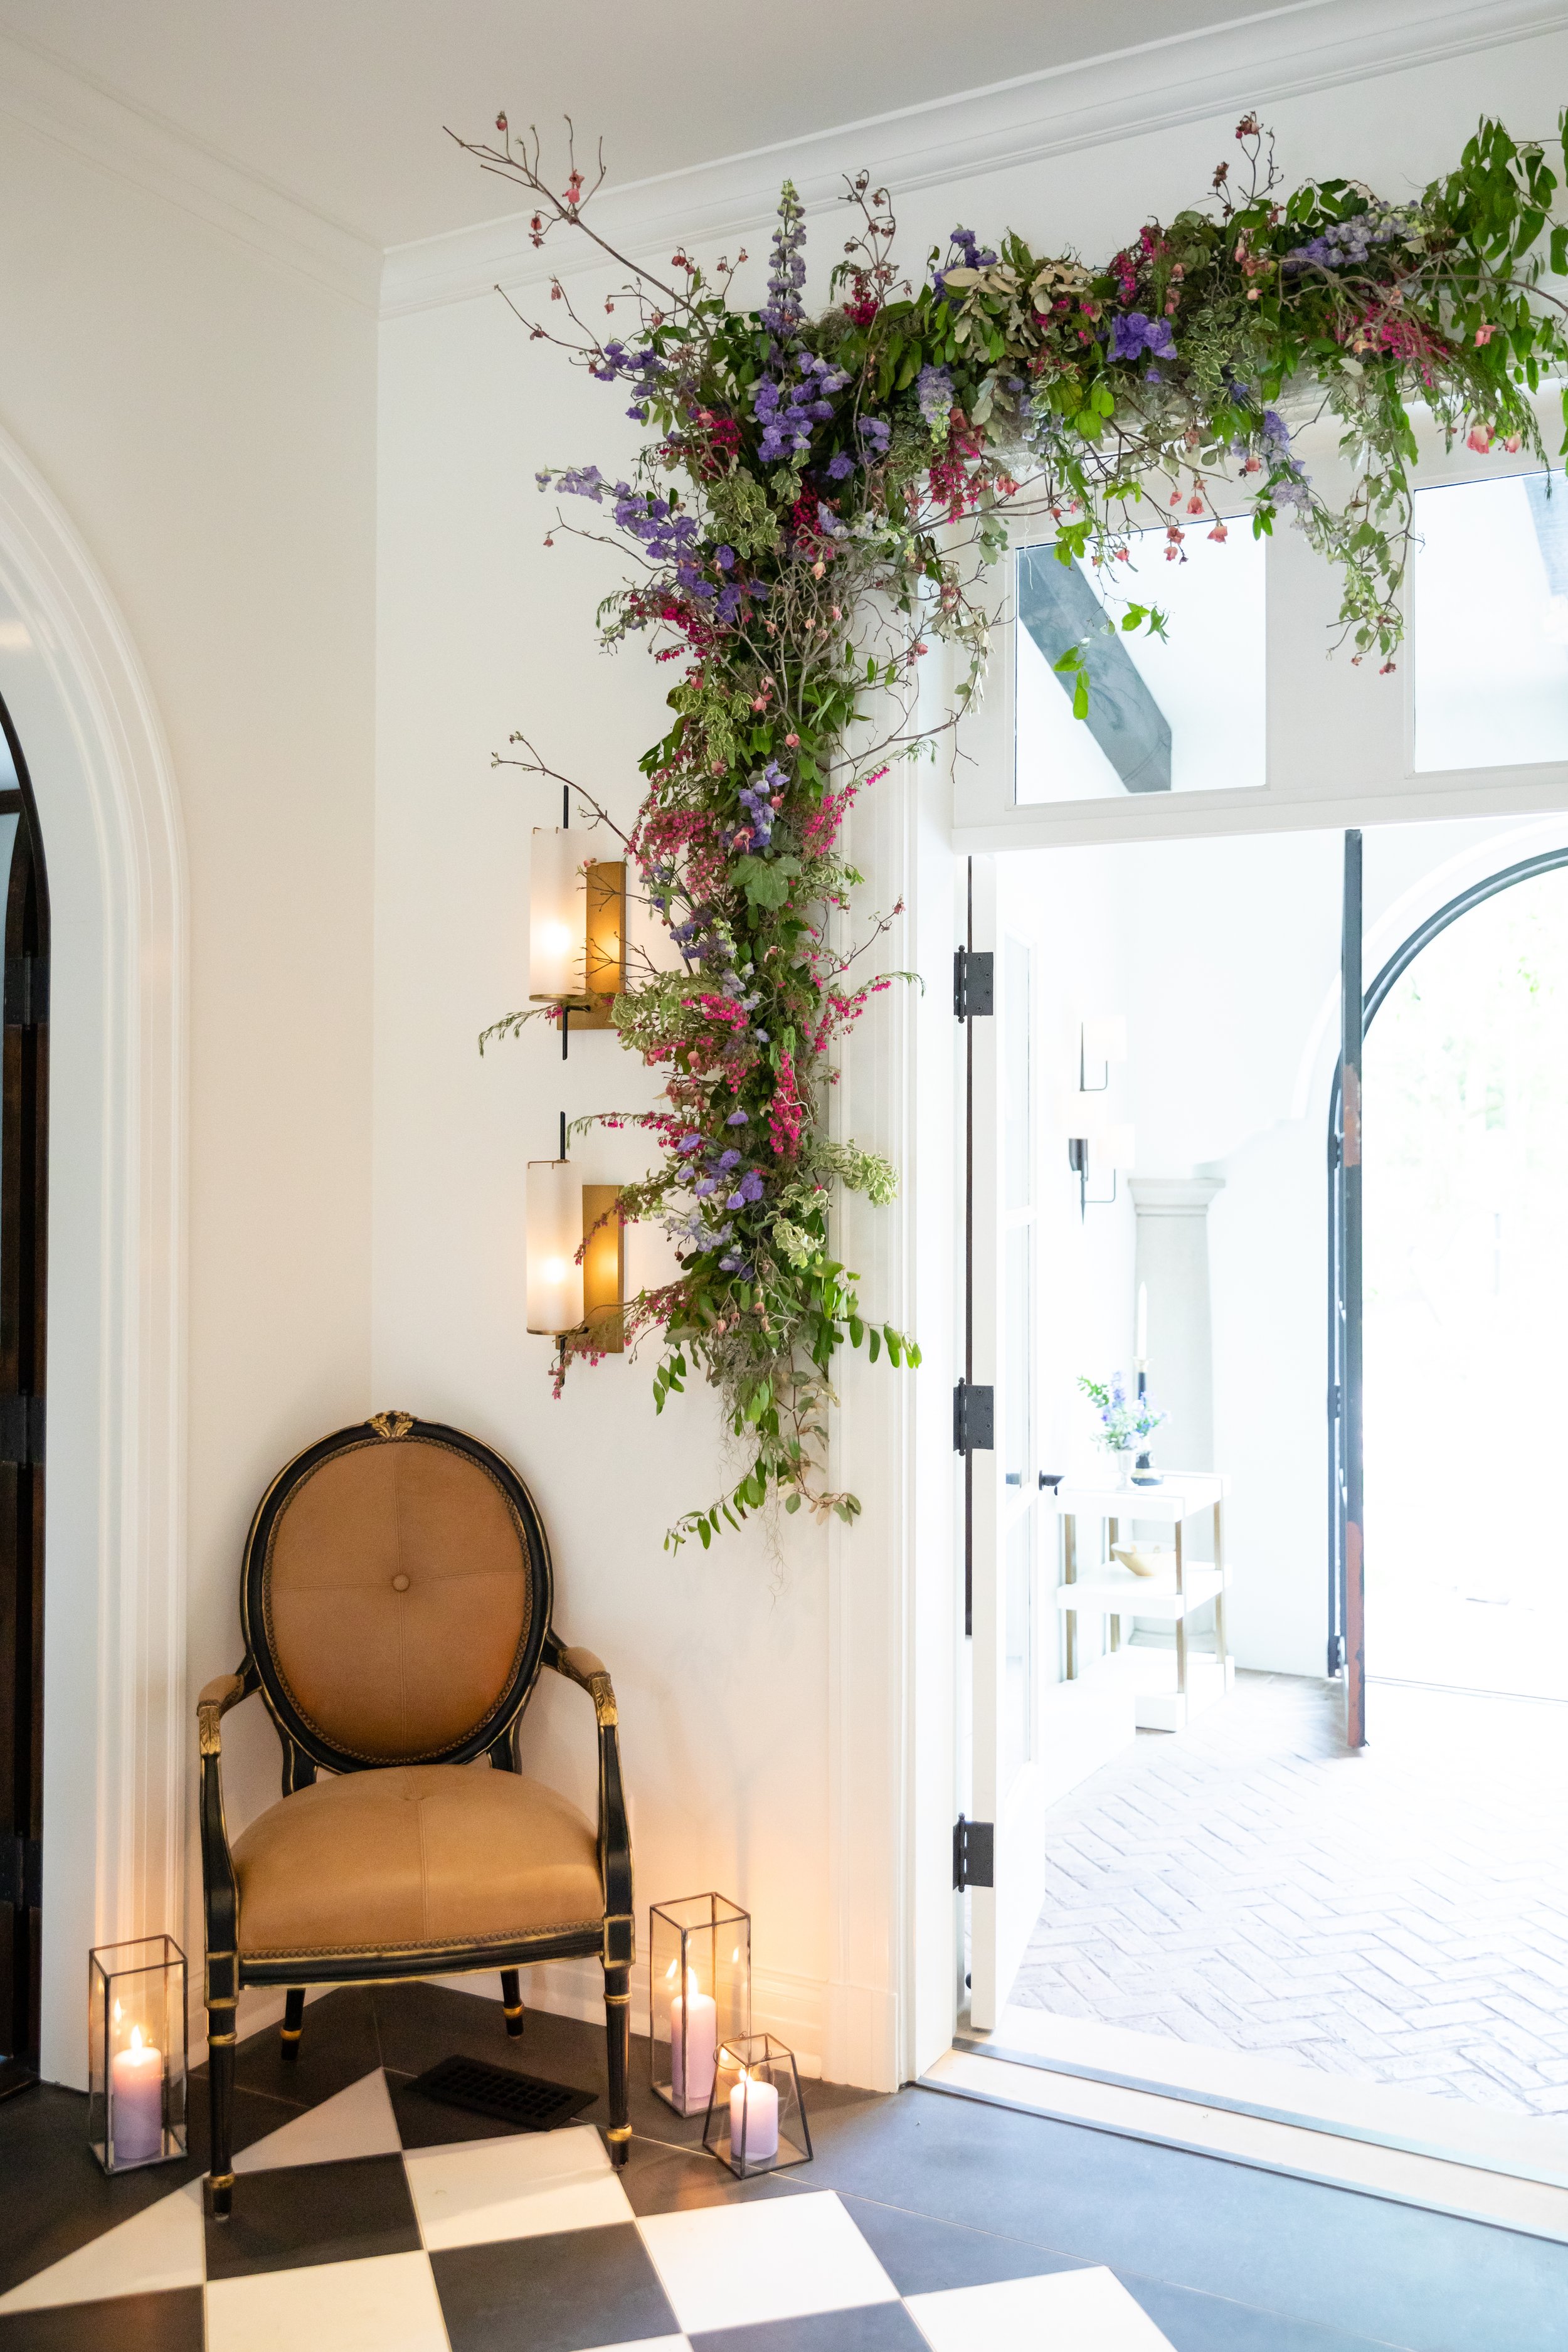 Lush floral installation growing to frame the doorway arch with natural greenery, purple globe allium, blush garden roses, and pastel wildflowers. Bridgerton inspired engagement party at a private home in Nashville, TN.